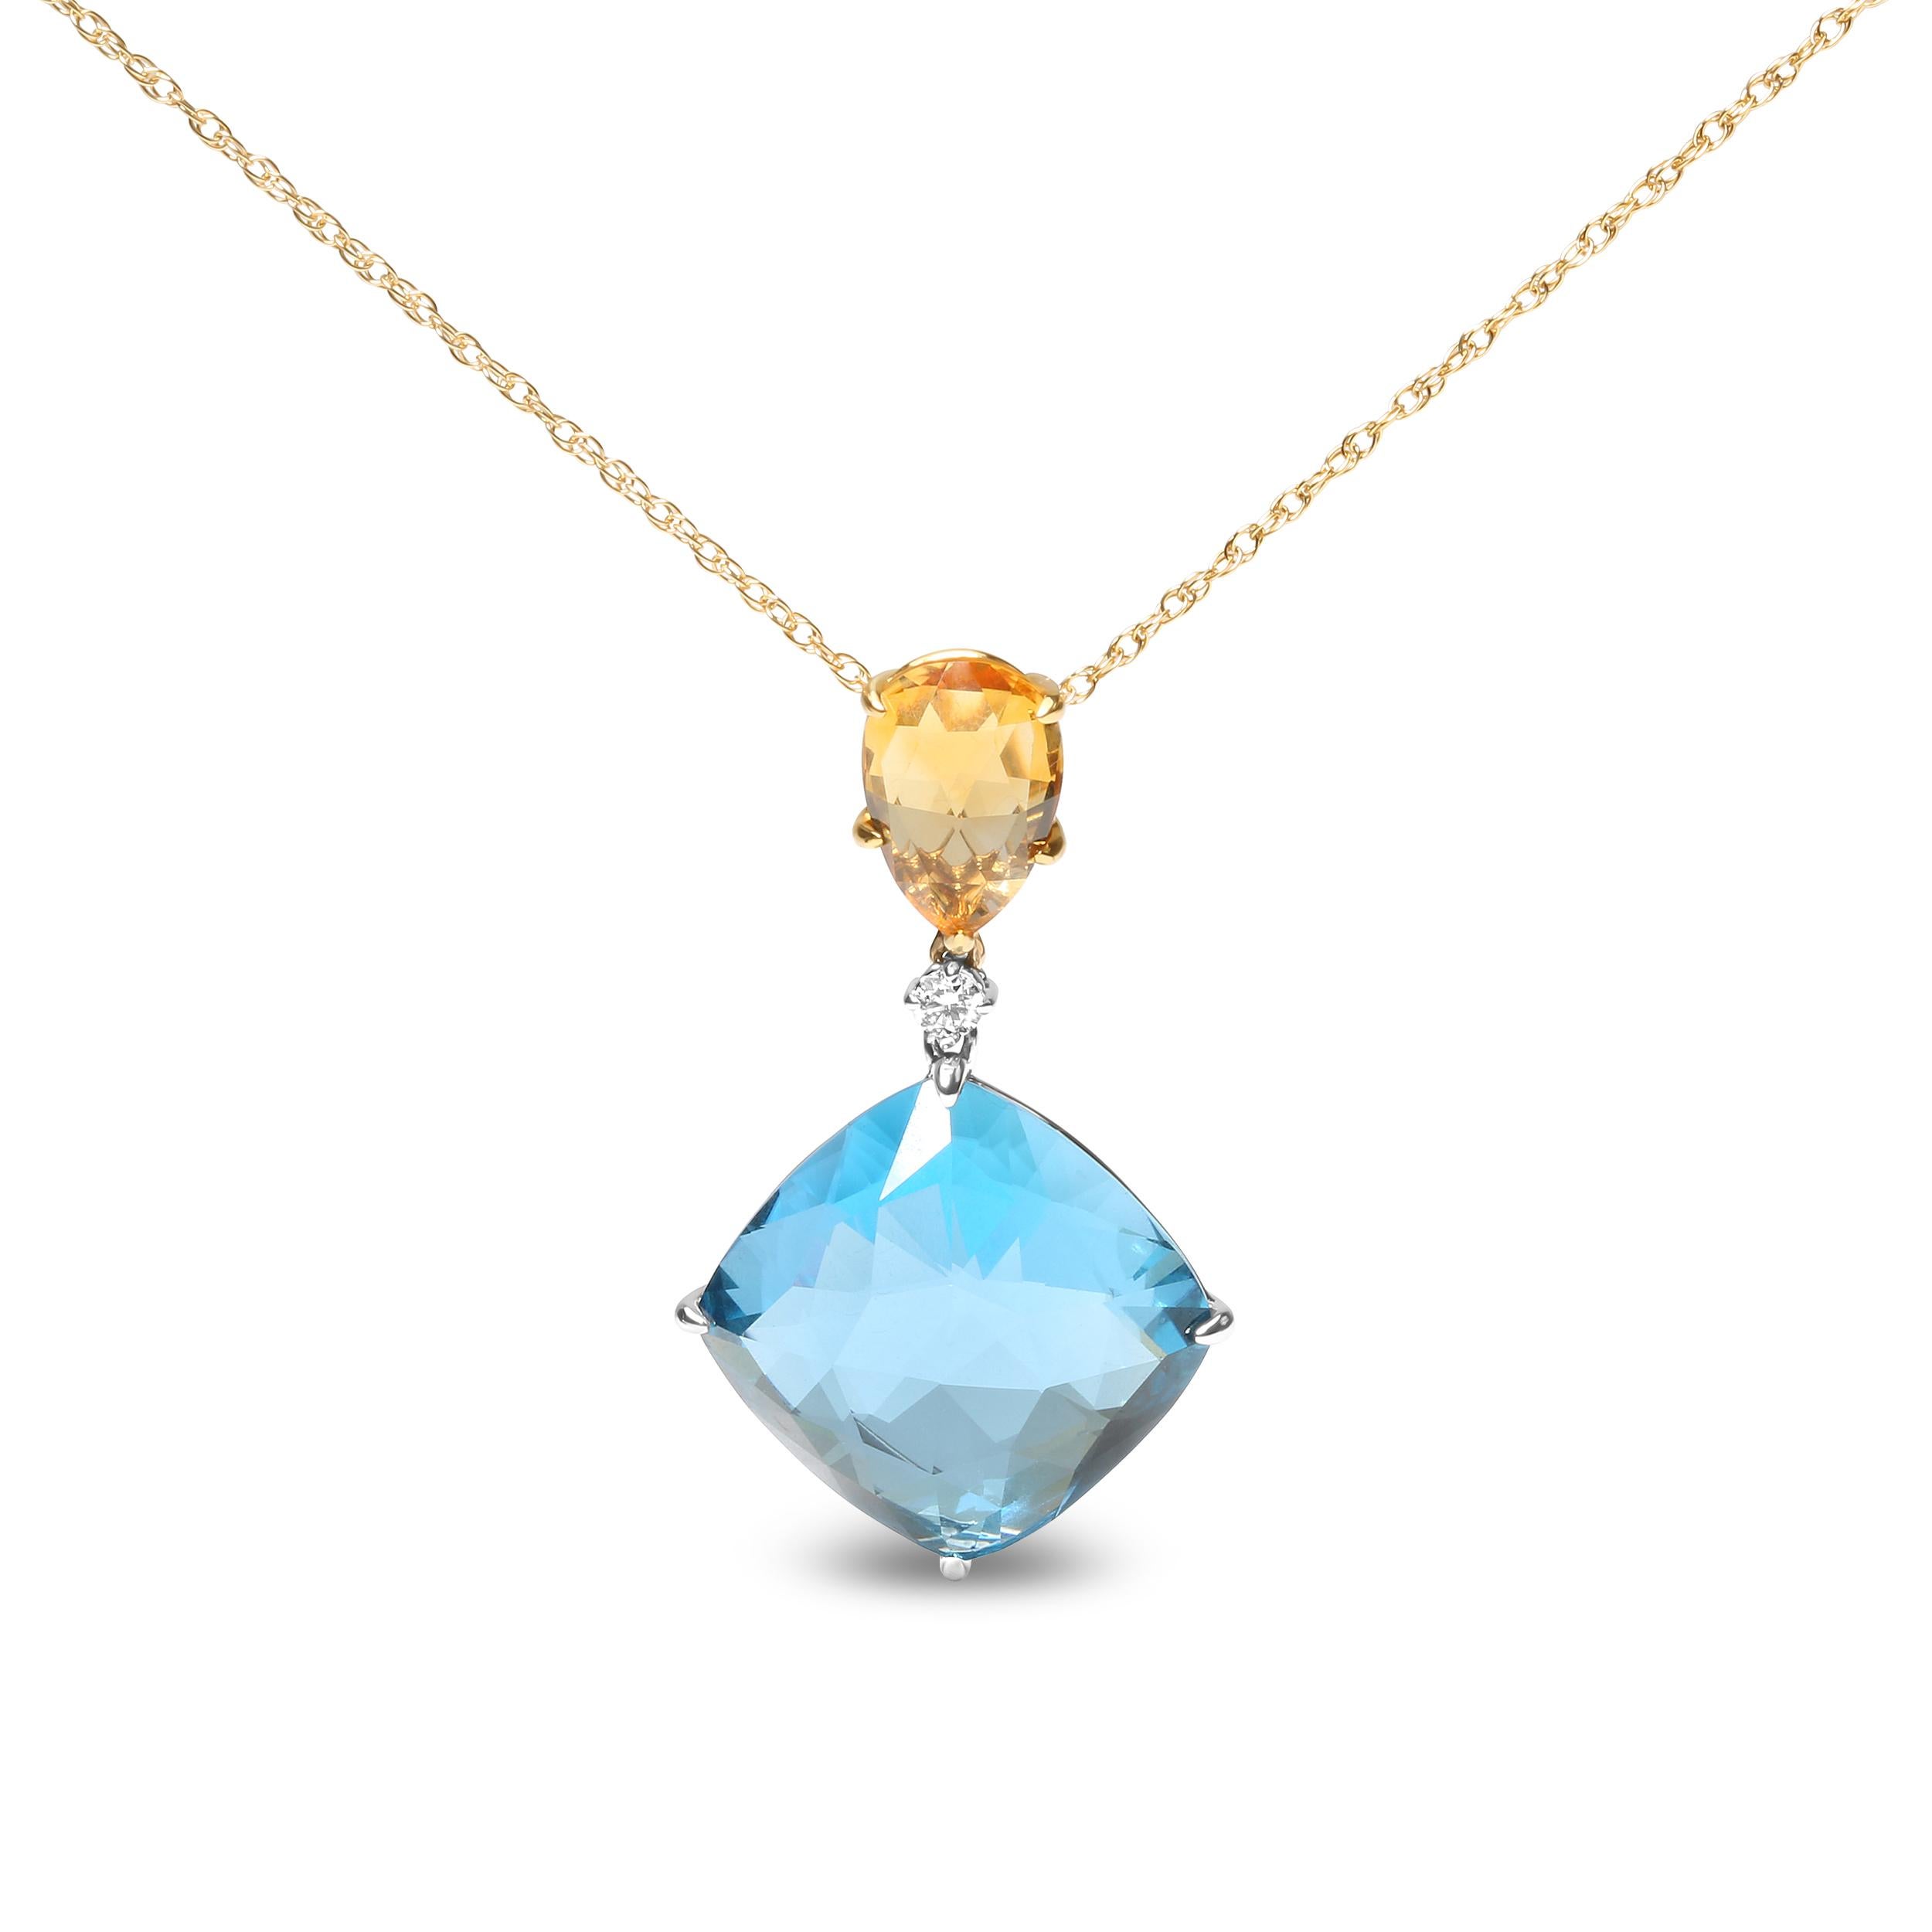 A gorgeous 20mm cushion-cut London blue topaz gemstone glimmers at the center of this elegant pendant necklace in a 4-prong setting. Adding to this rich sparkle is a second natural gemstone, which sits cradled in a 4-prong setting above. This 12x8mm